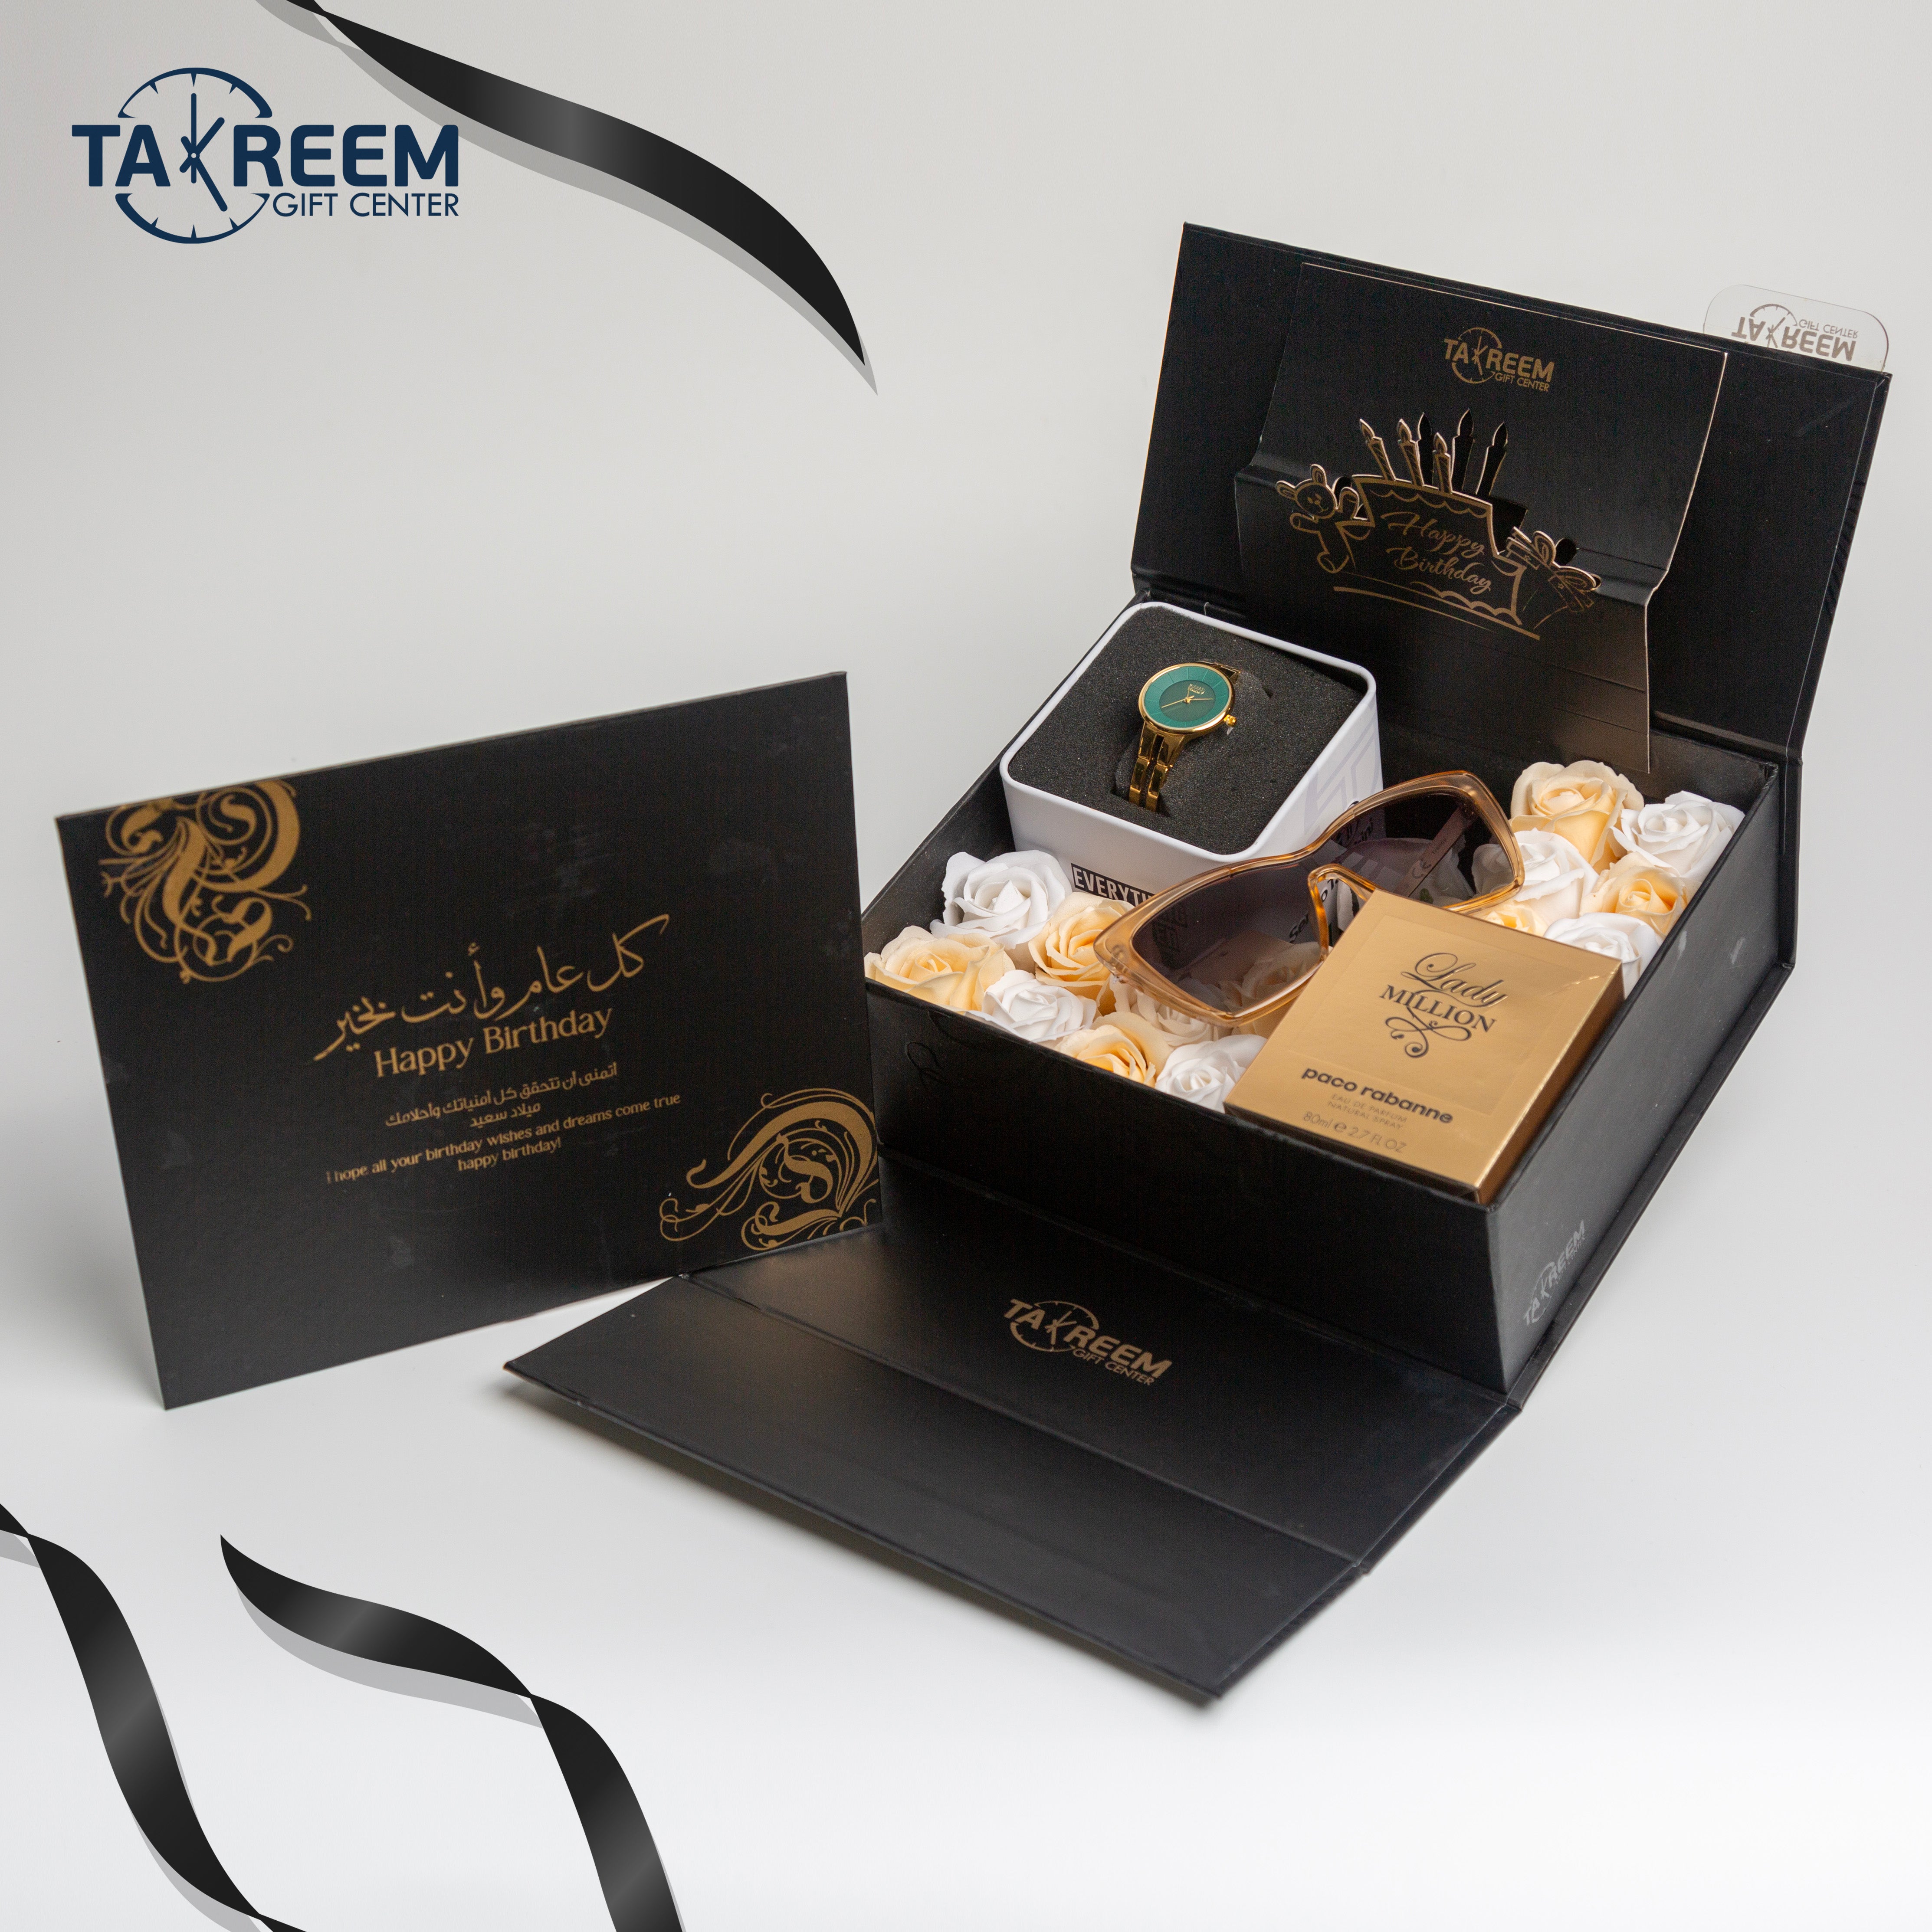 Big Gold4 Gift Boxes By Takreem Gifts Center